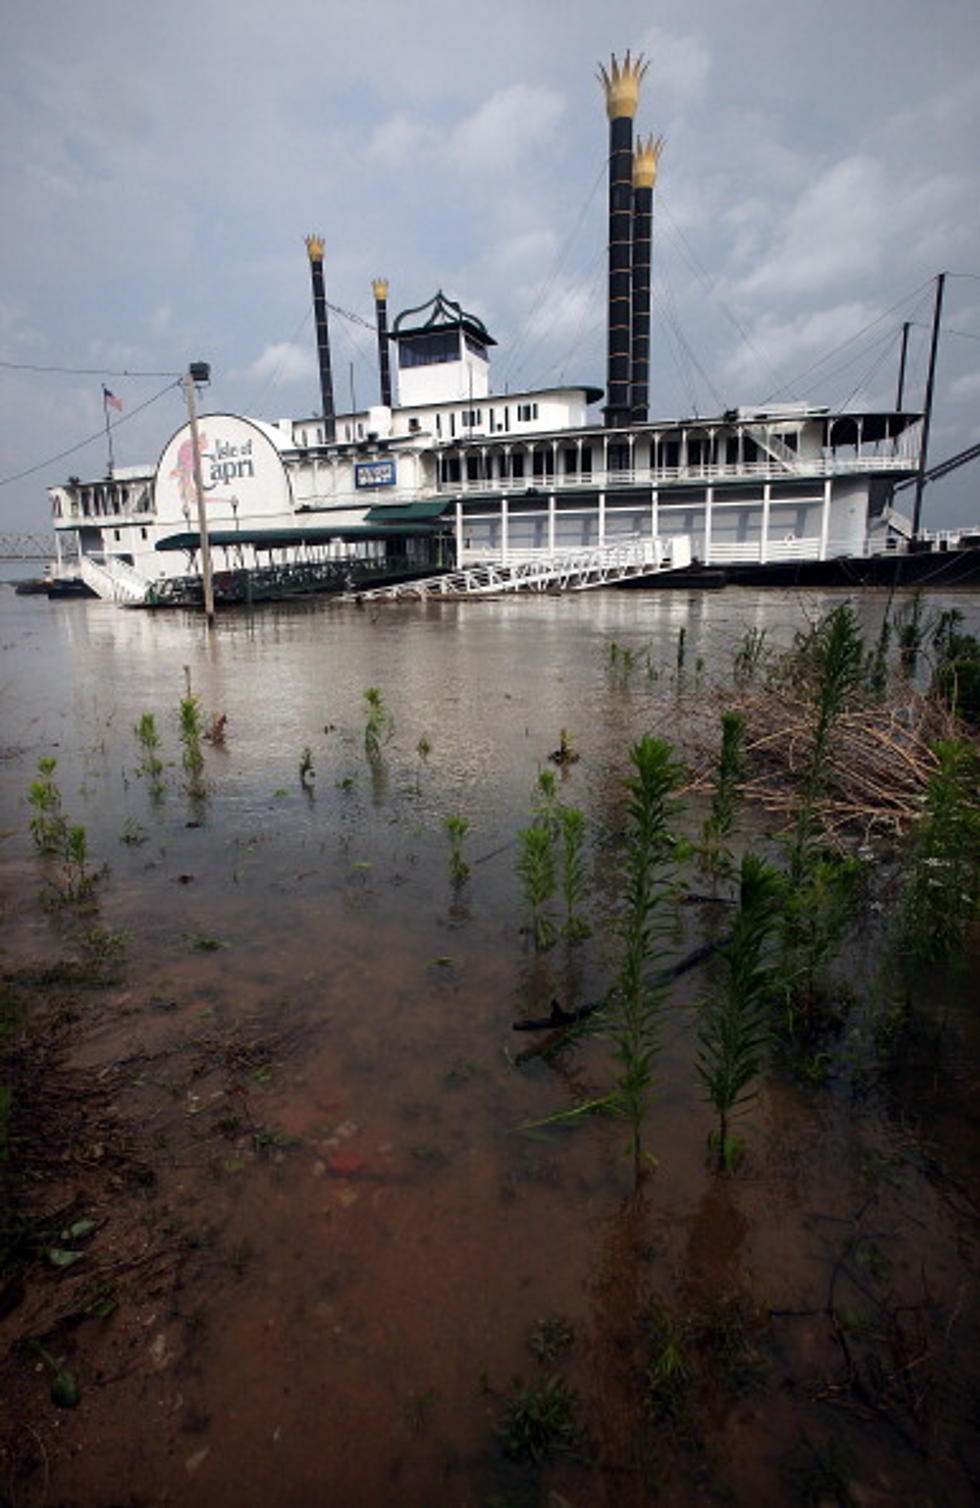 3 Riverboat Casinos Show Interest in Moving on Land